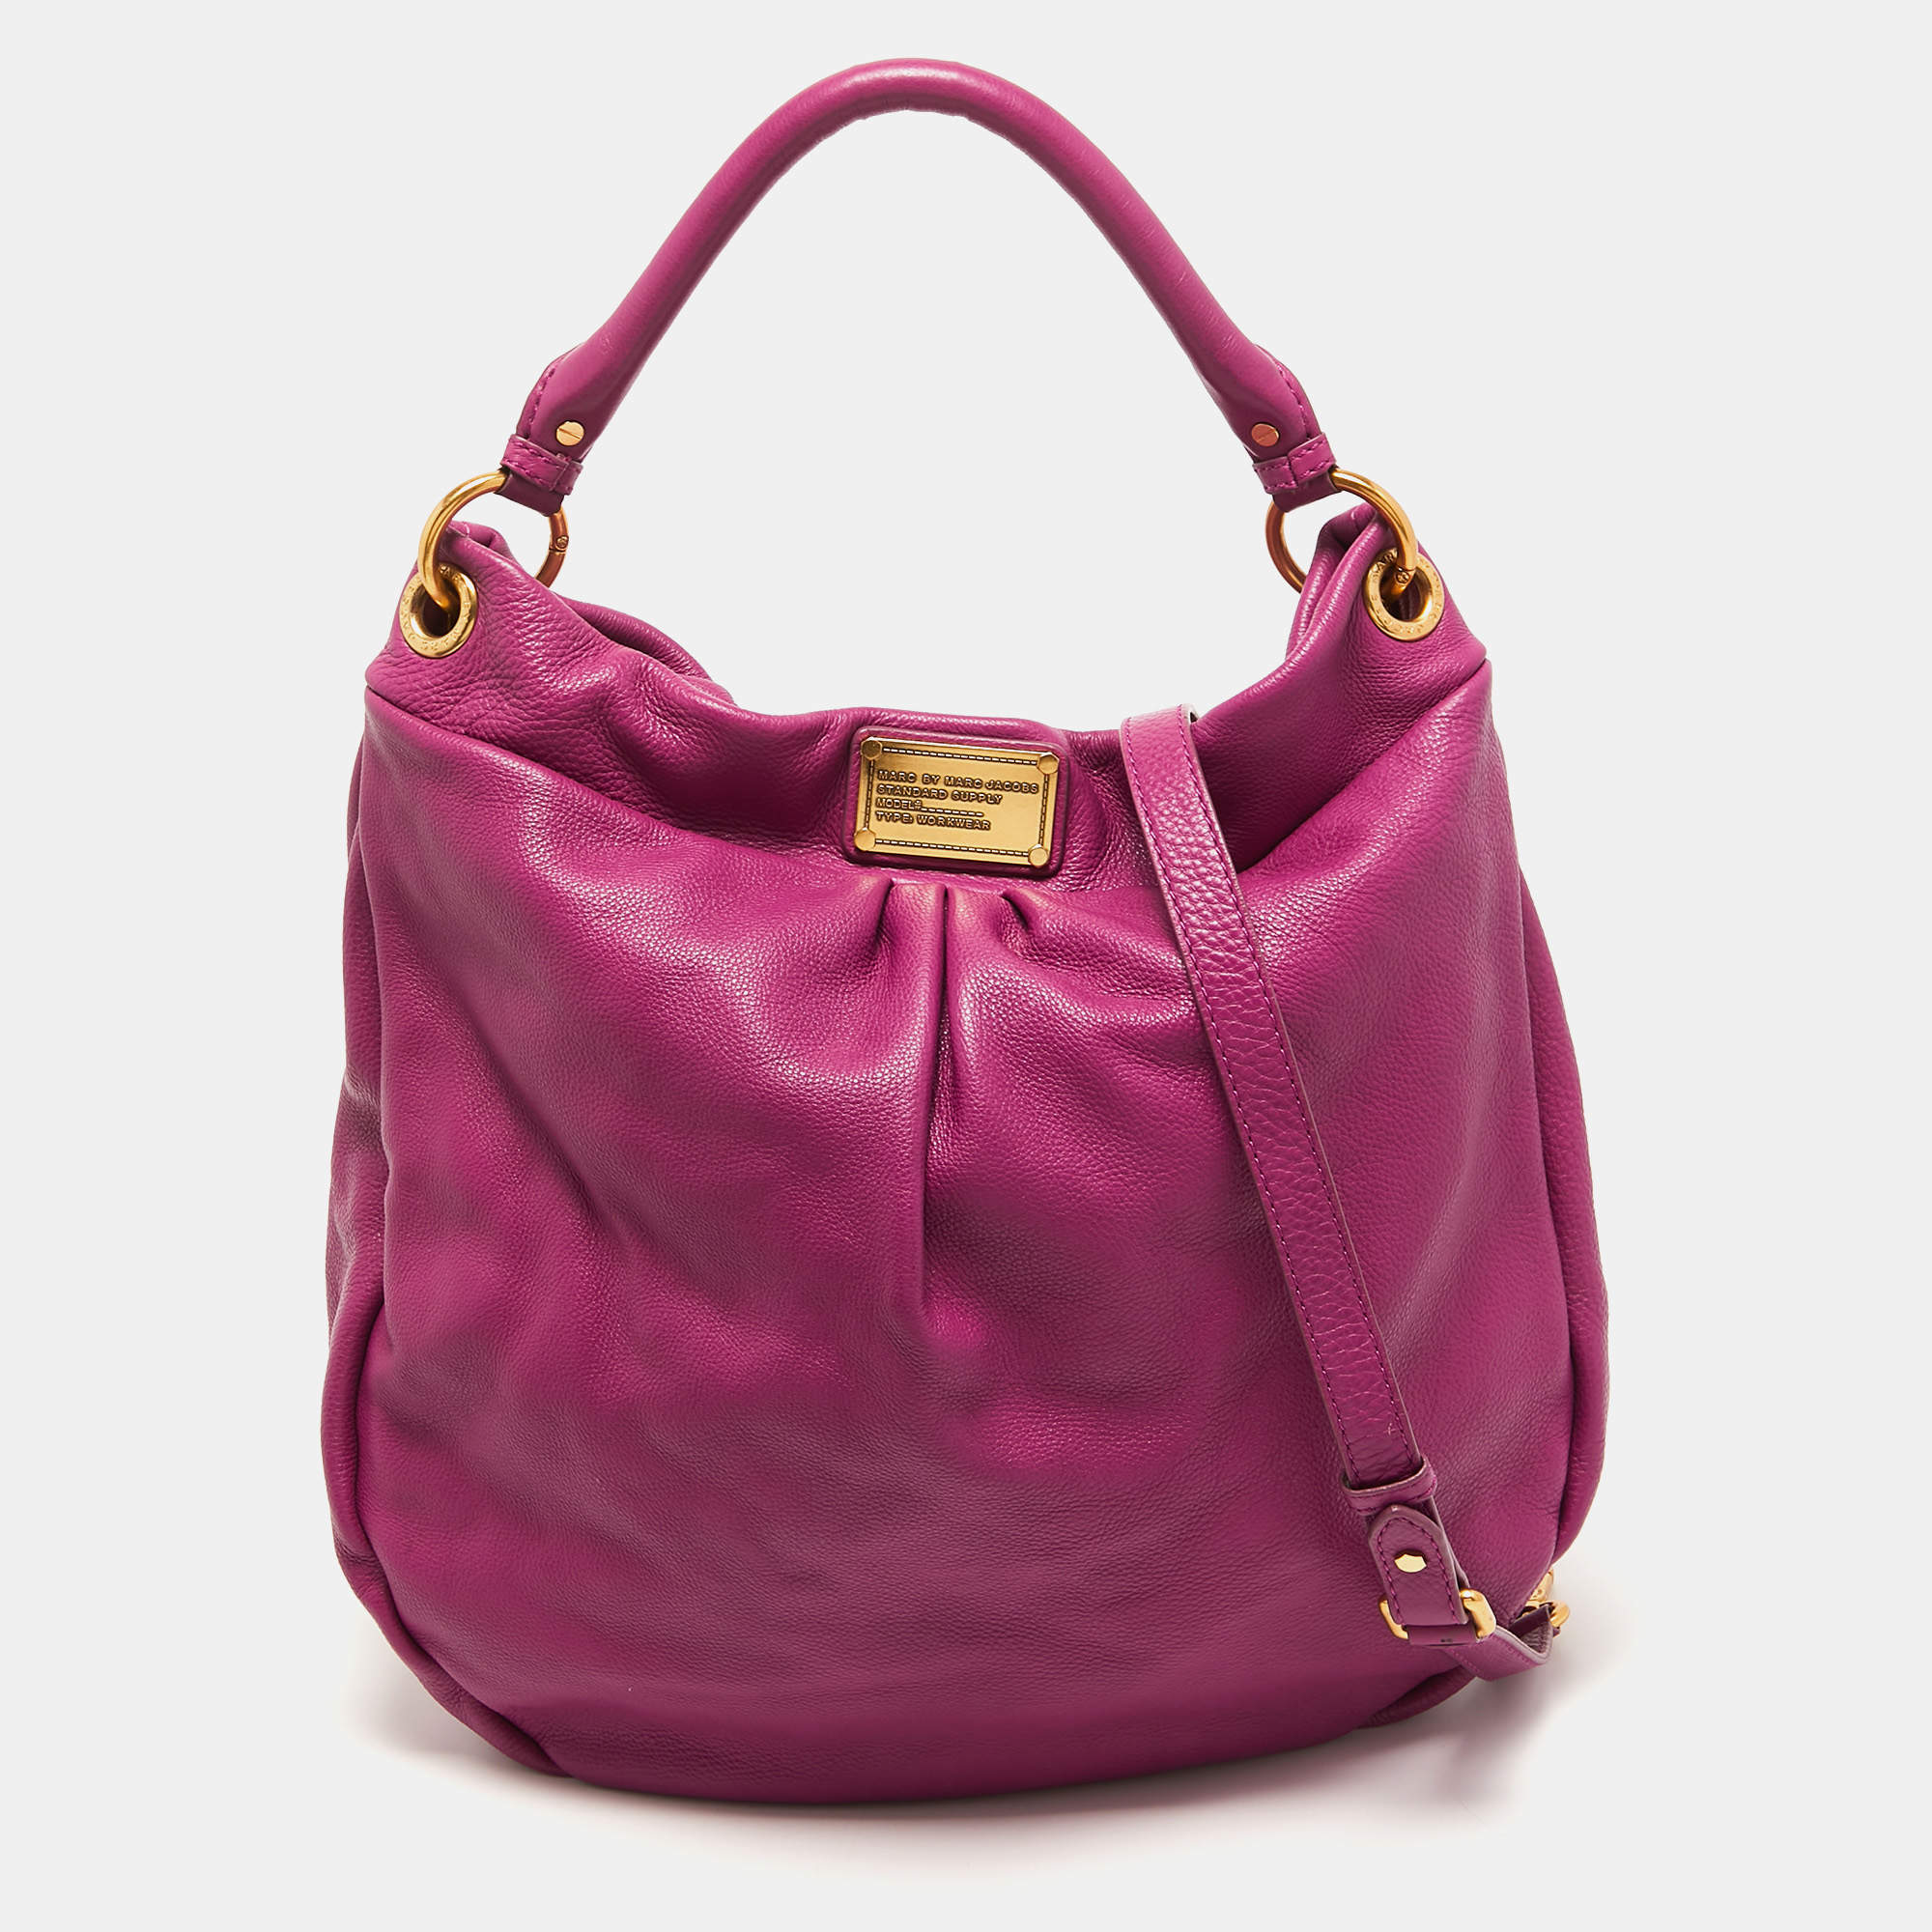 Marc by Marc Jacobs Pink Leather Hobo